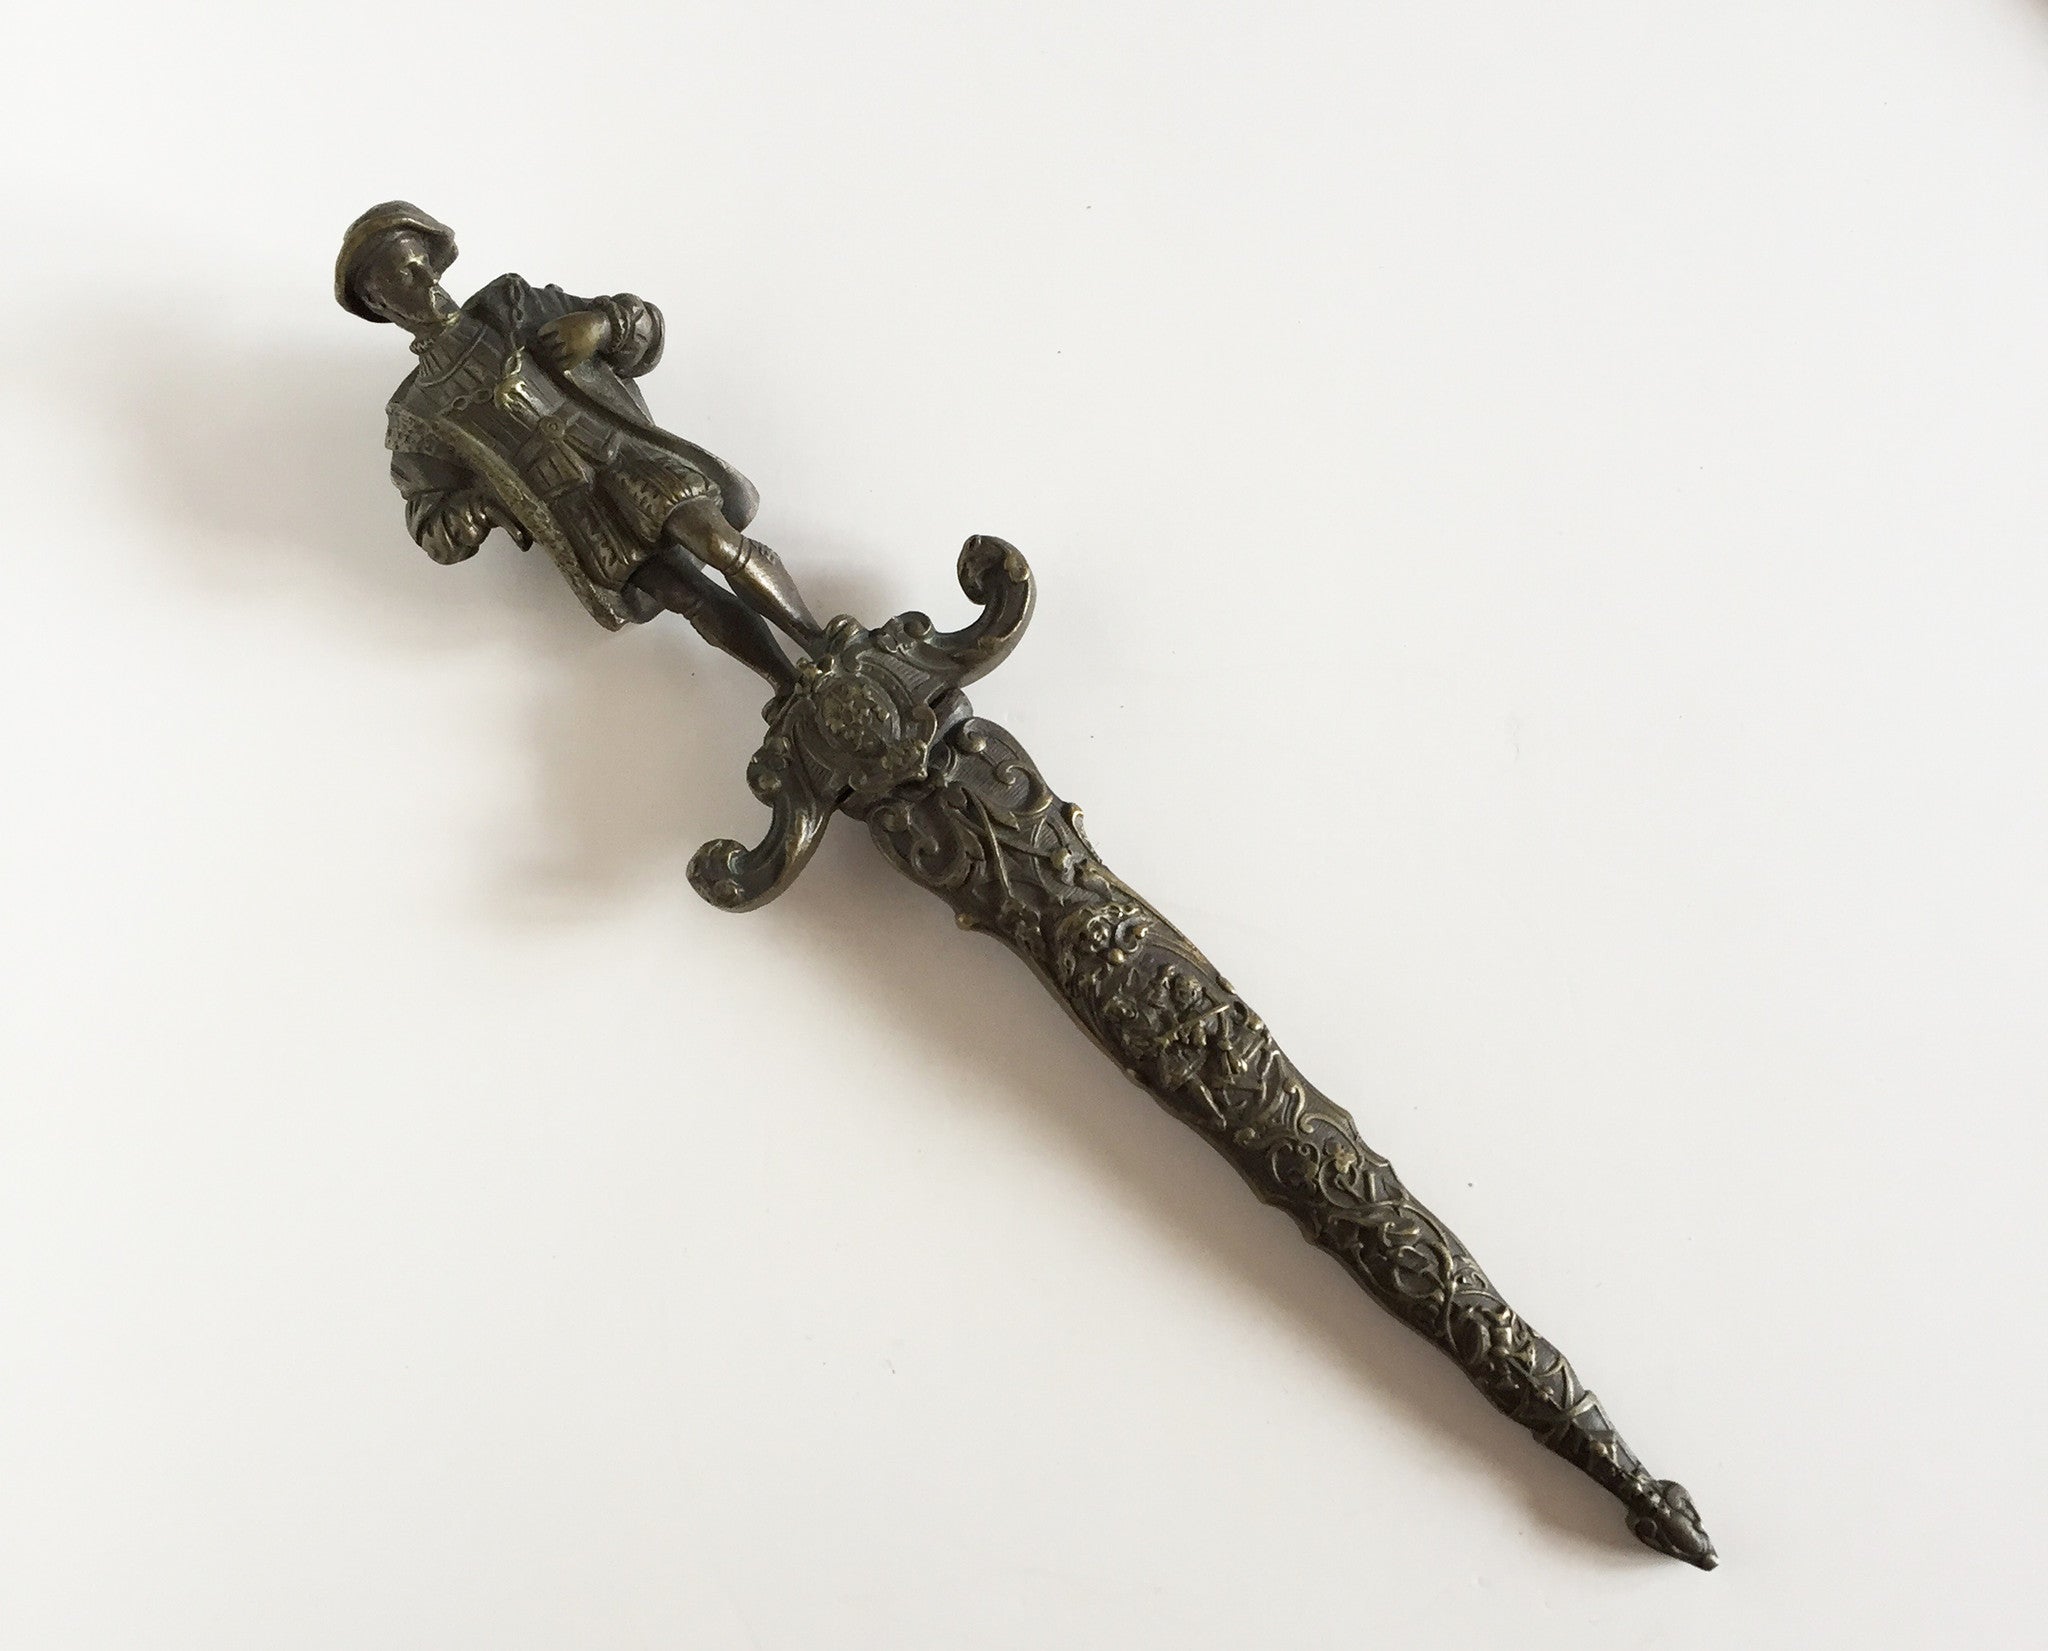 SOLD Continental Gothic-Style Cast-Bronze and Steel Daggar or Knife, Circa 1870-1880